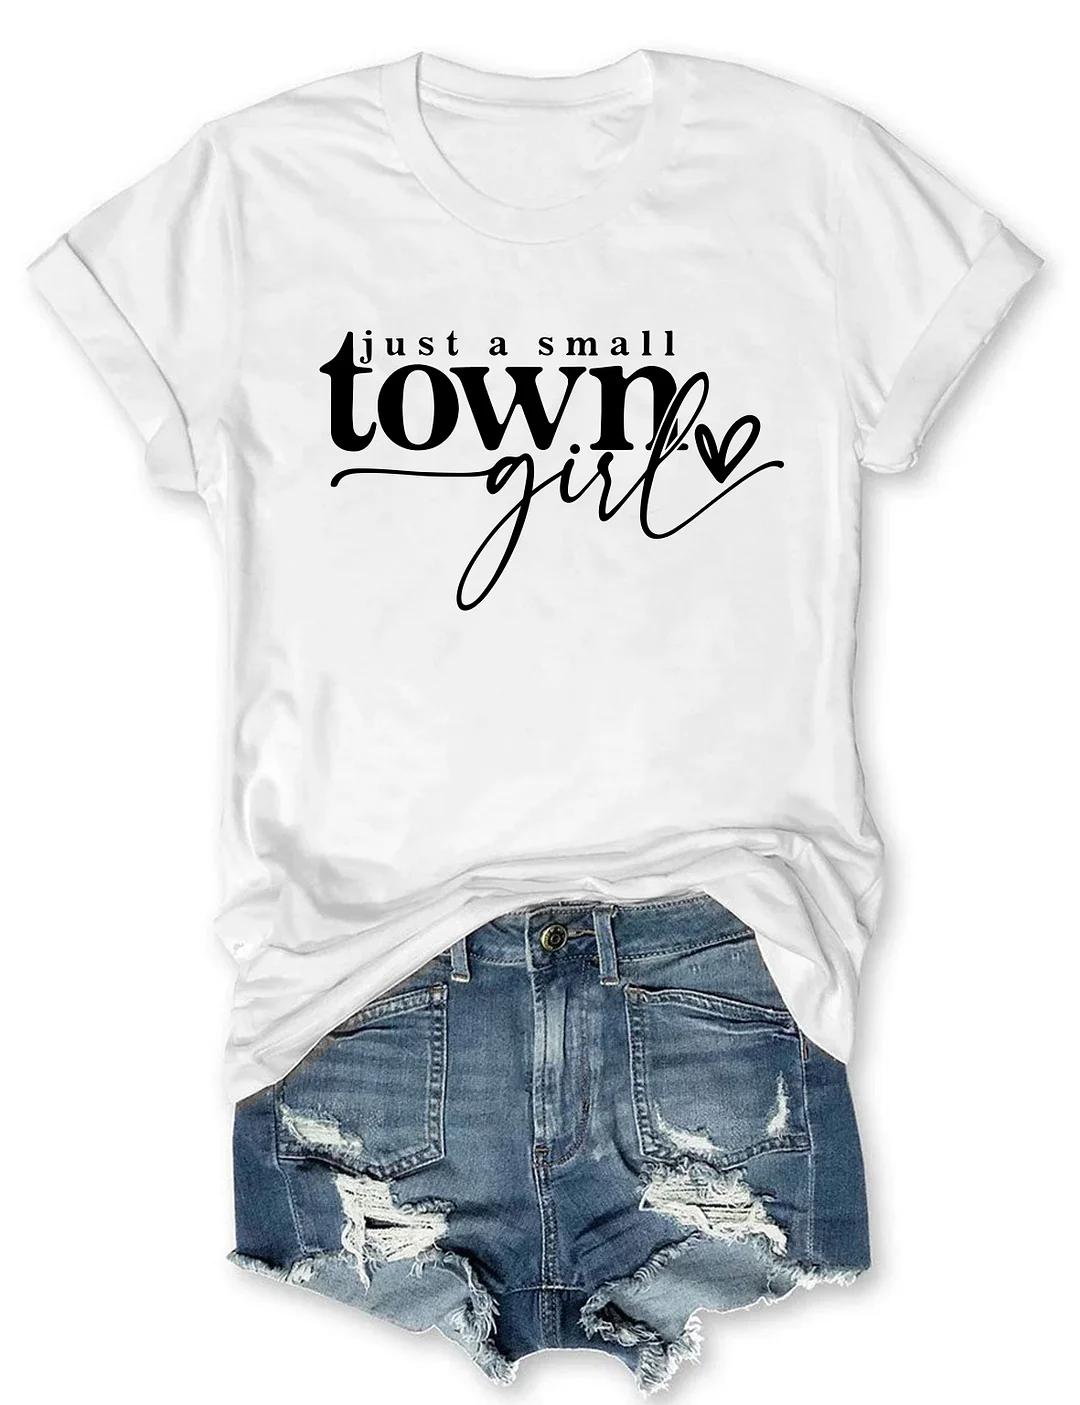 Just a Small Town Girl T-shirt